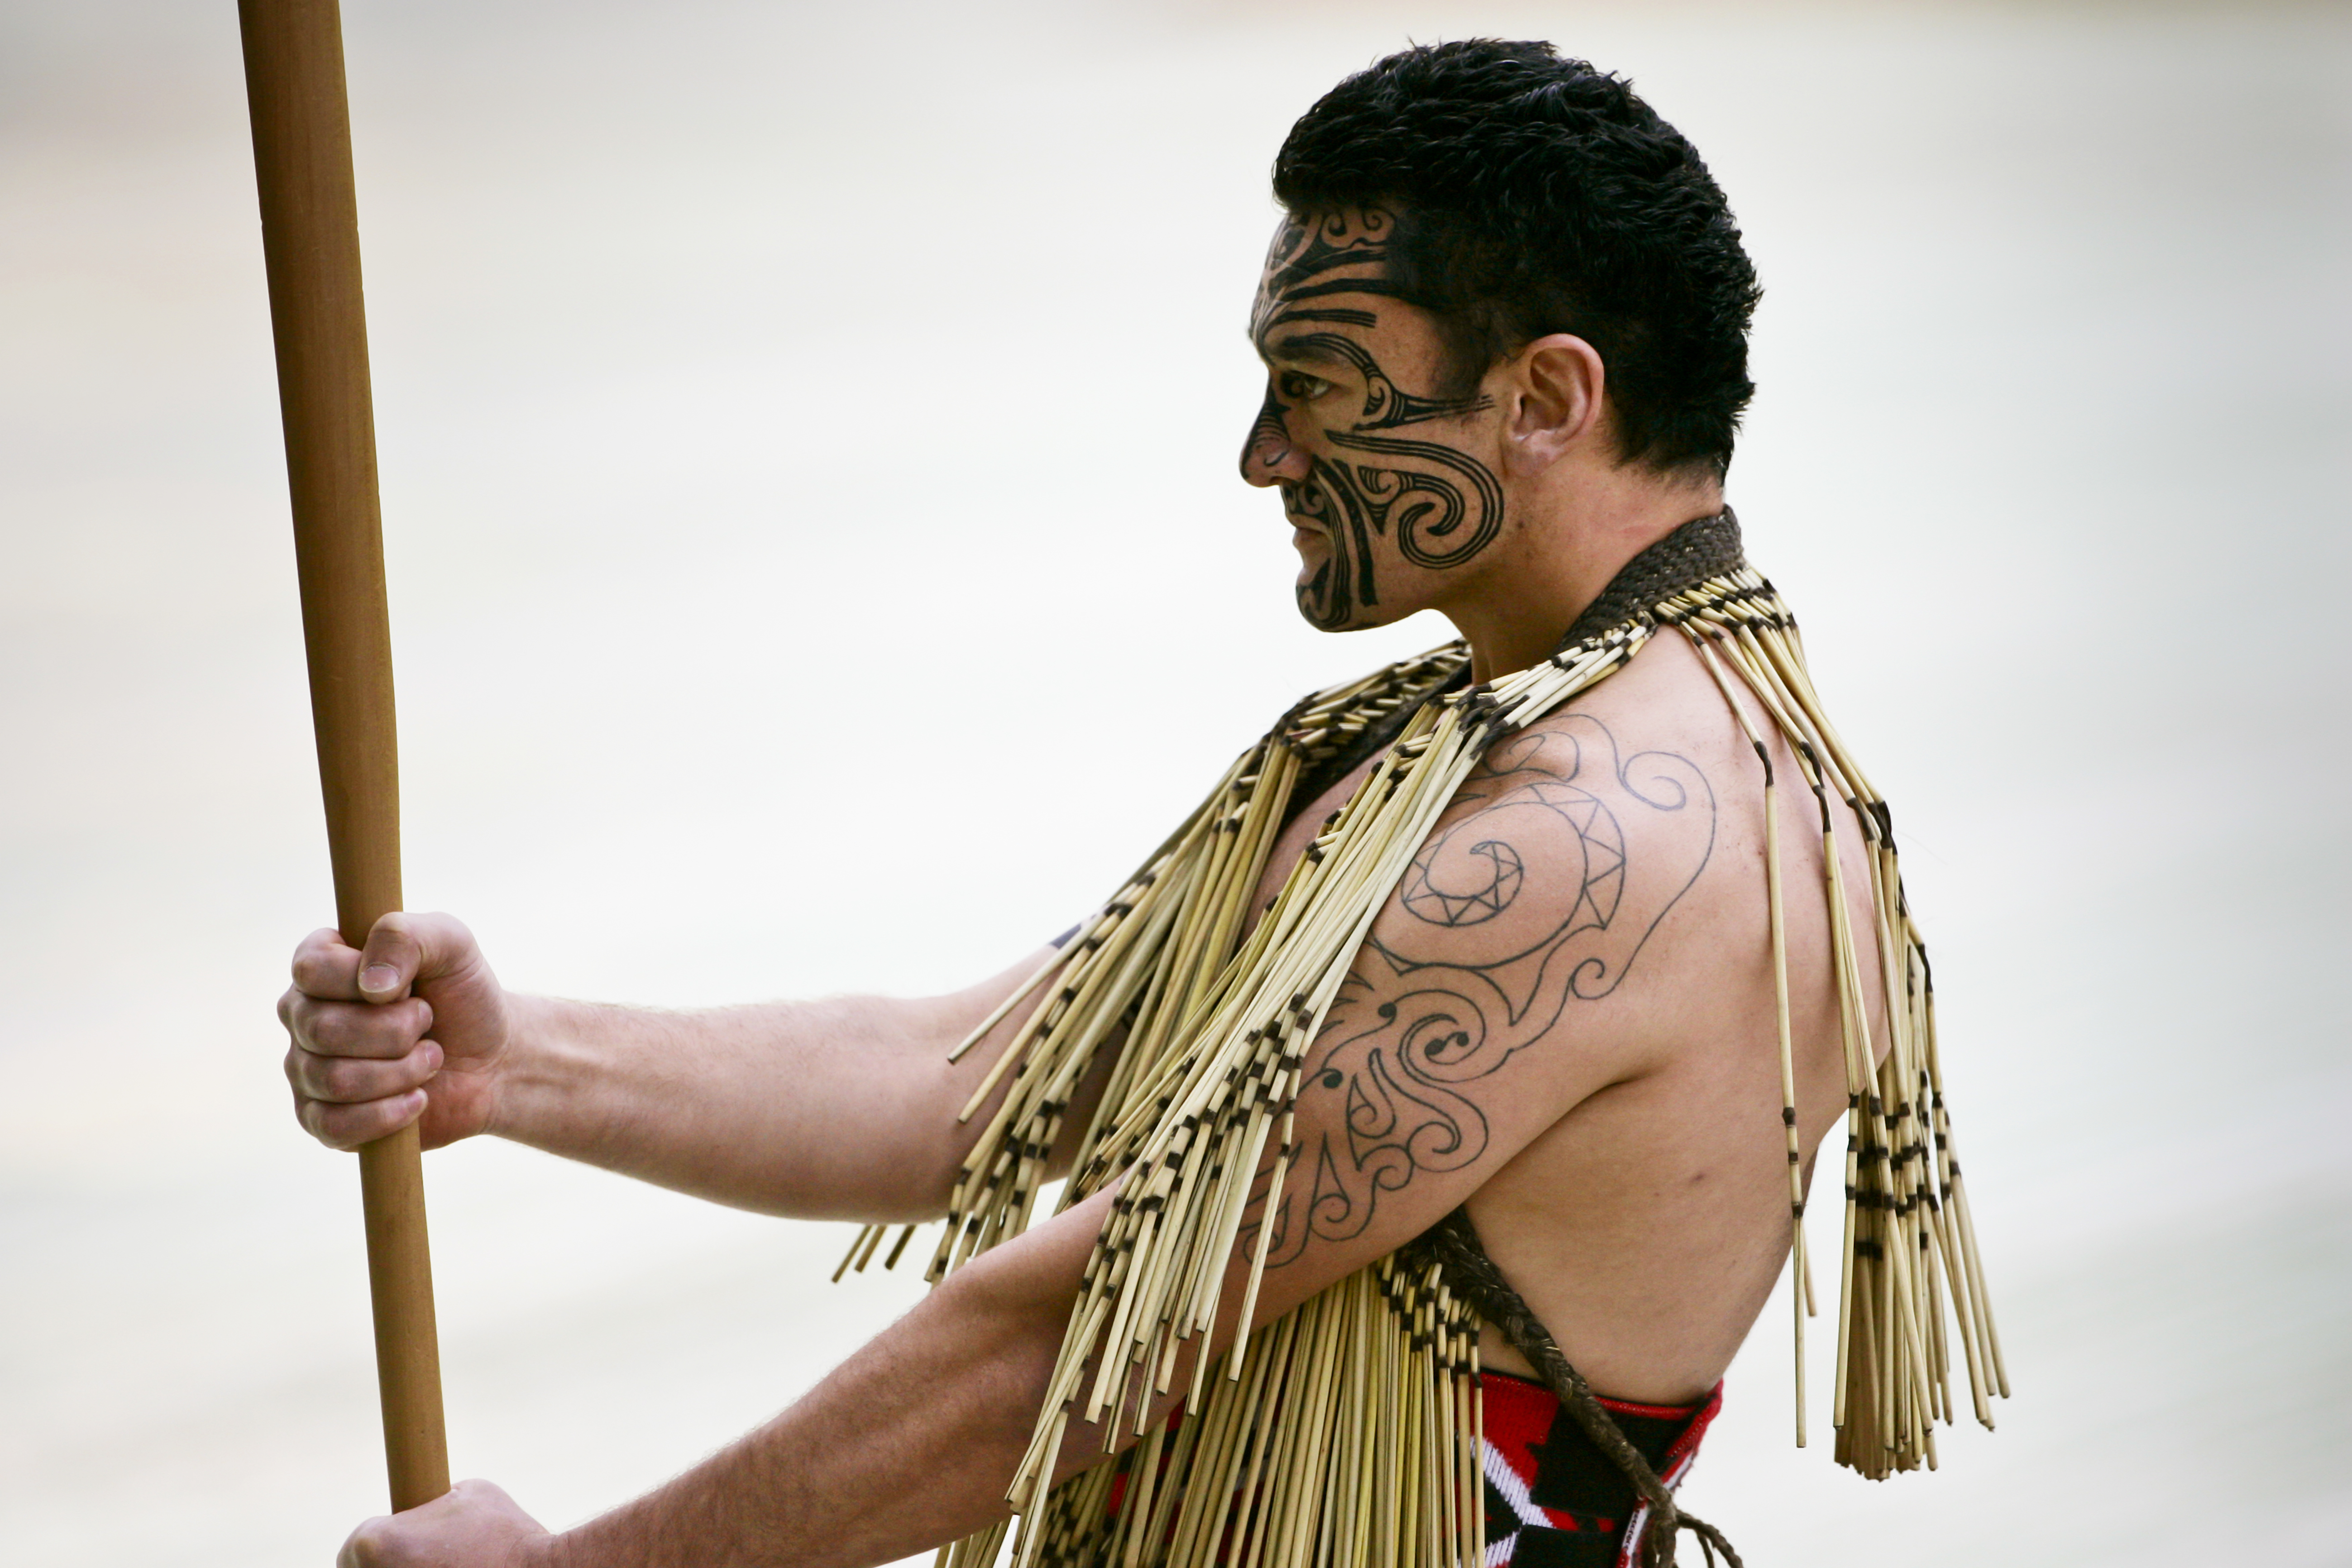 A traditional Haka performed by a Maori warrior